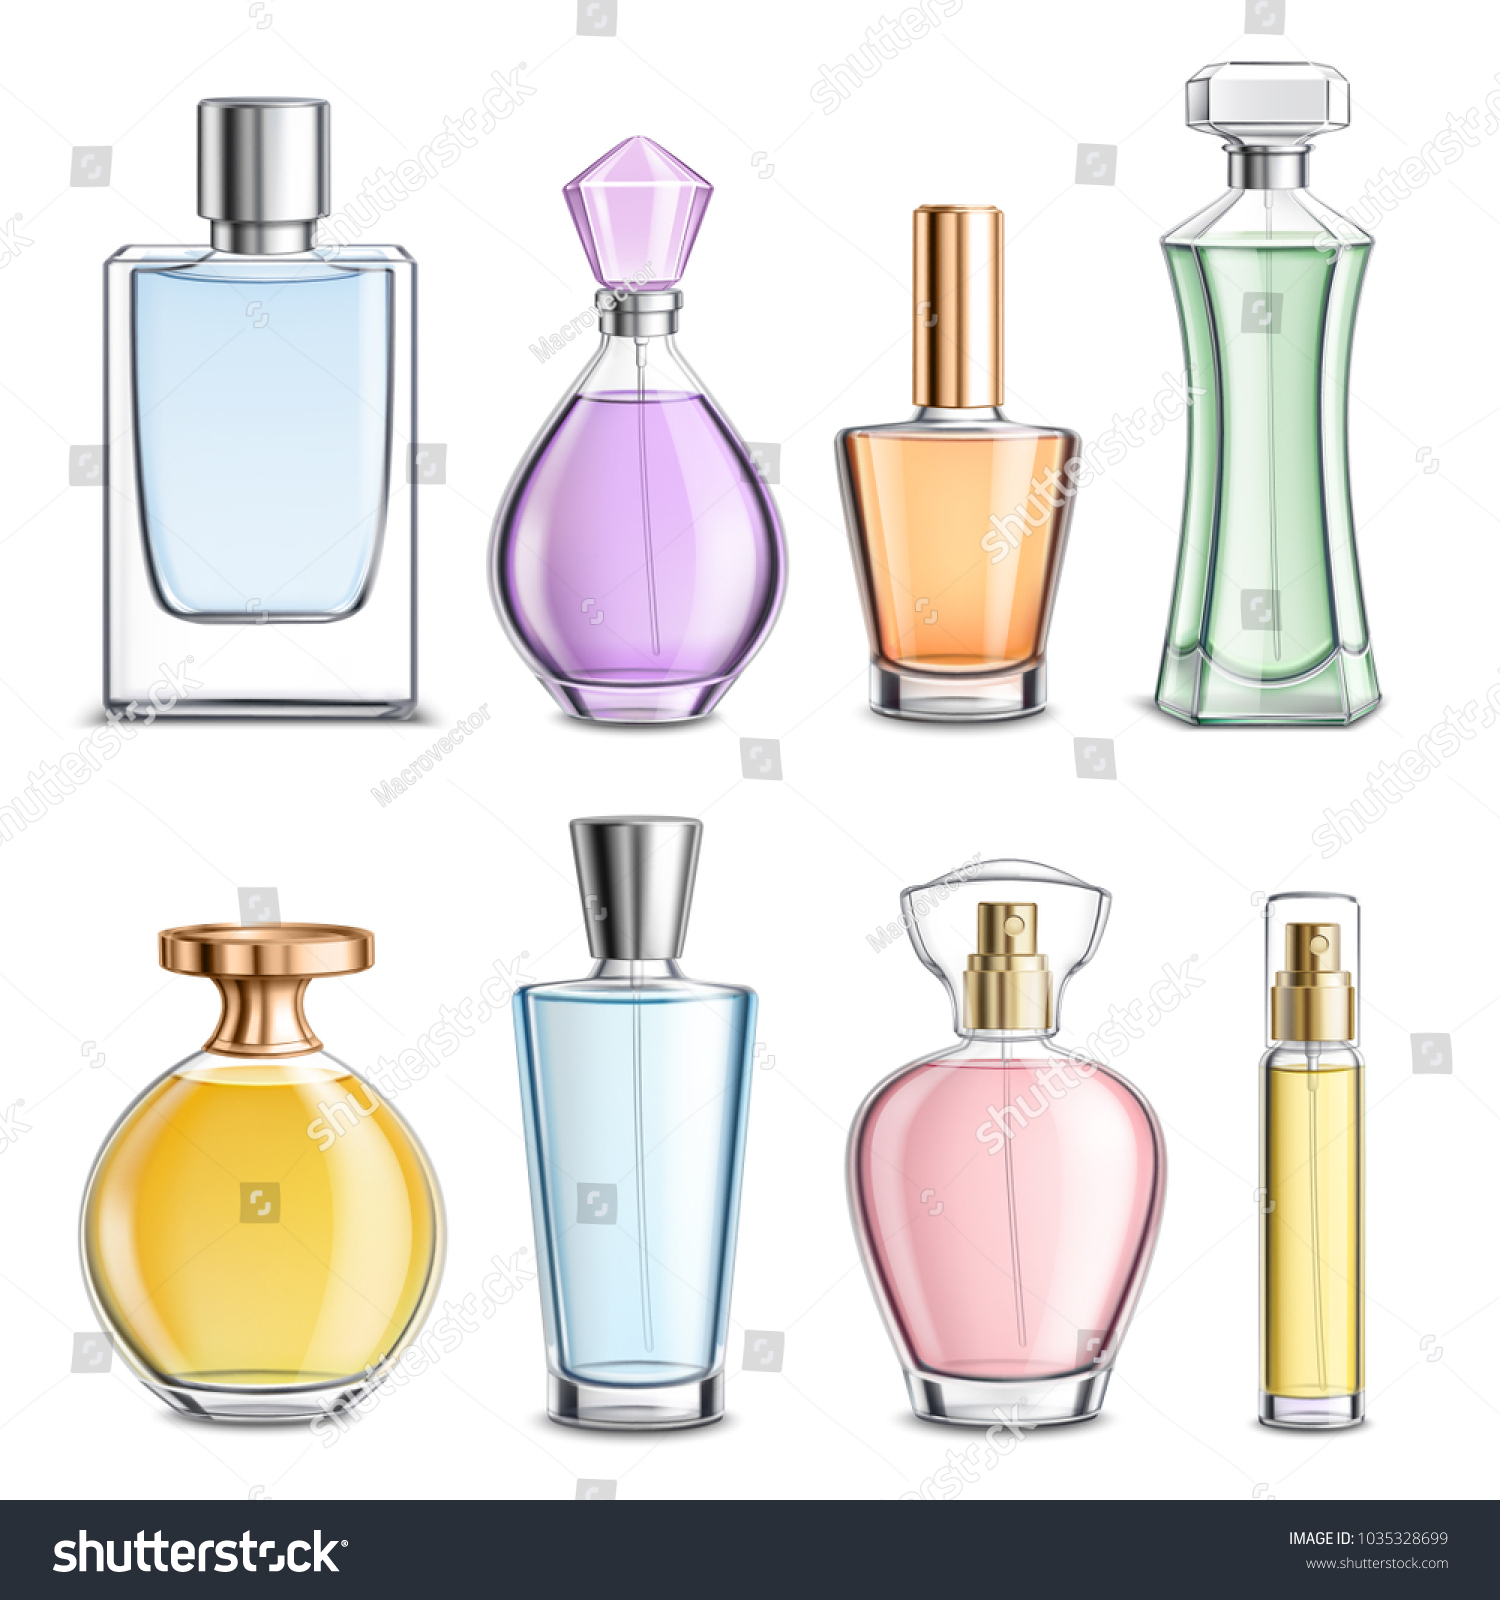 SVG of Perfume glass bottles various shapes caps and color 3d  realistic set on white background isolated vector illustration svg